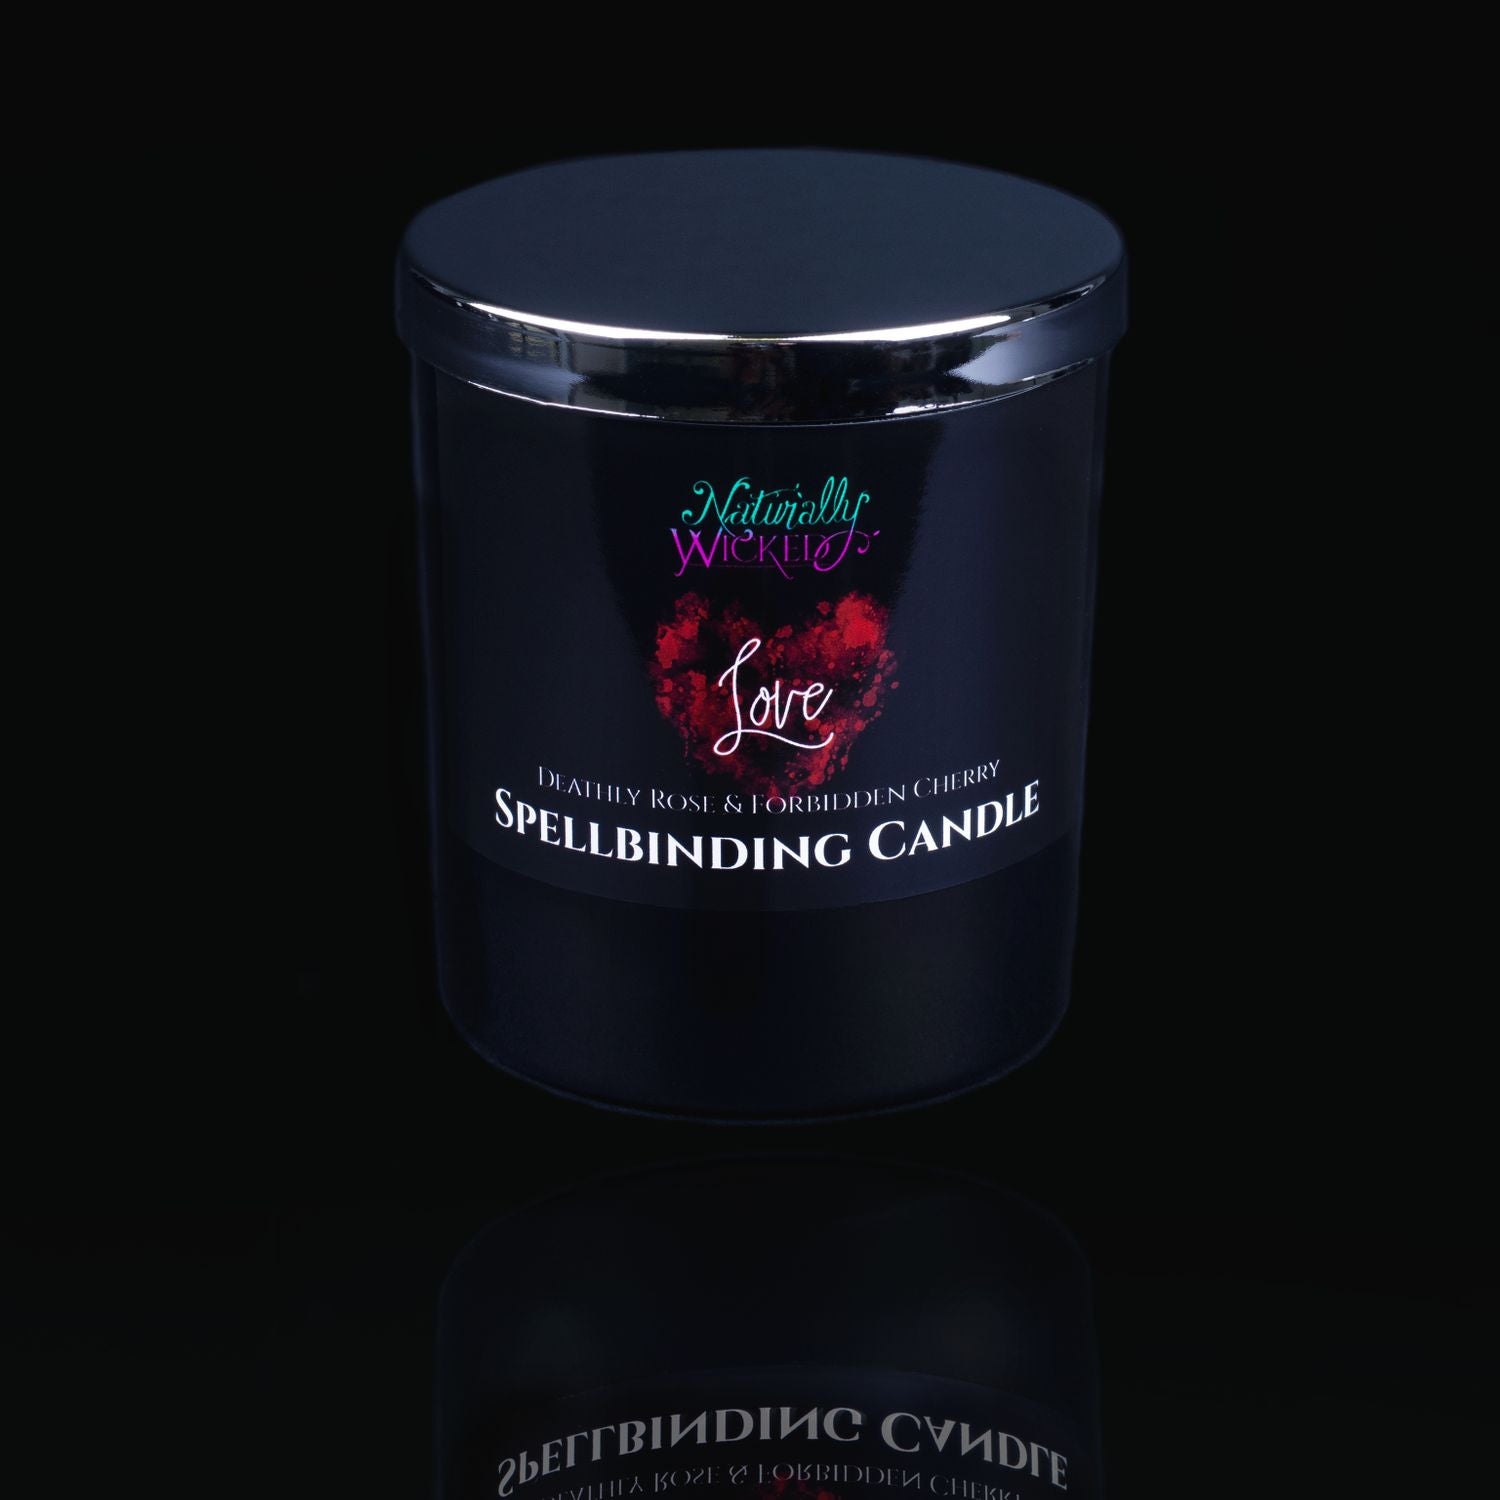 Naturally Wicked Spellbinding Love Spell Candle With Mirror Finished Exquisite Lid In Place. Featuring A Black Gloss Label And A Bright Red Love Heart. Give The Gift Of Love